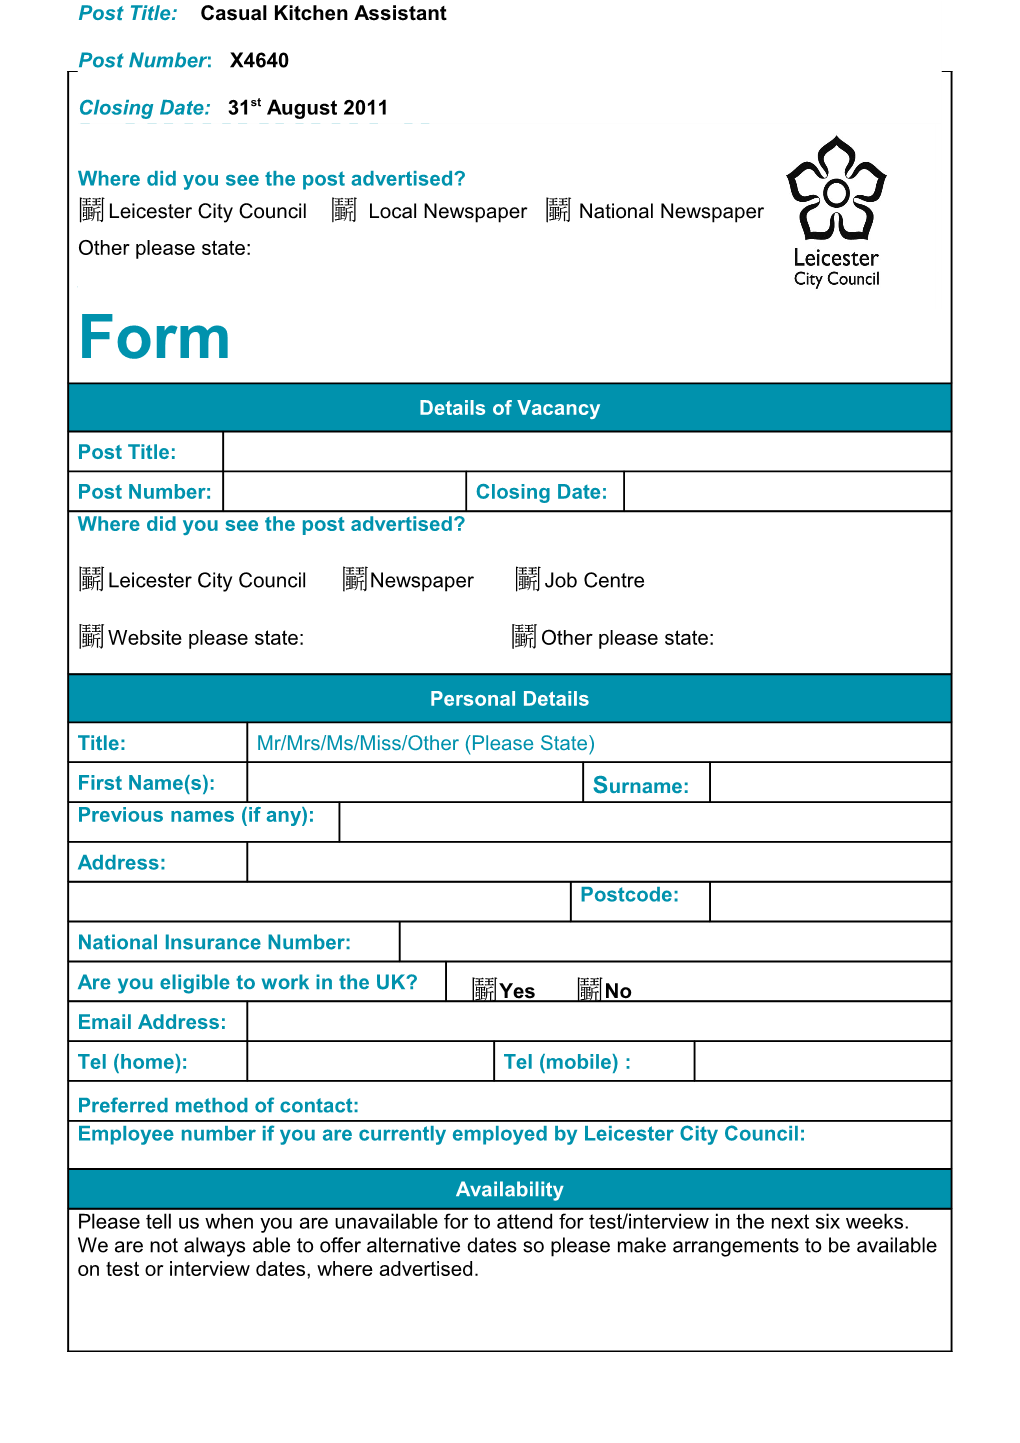 I Confirm That the Details That I Have Provided in This Application Form Are Correct, And